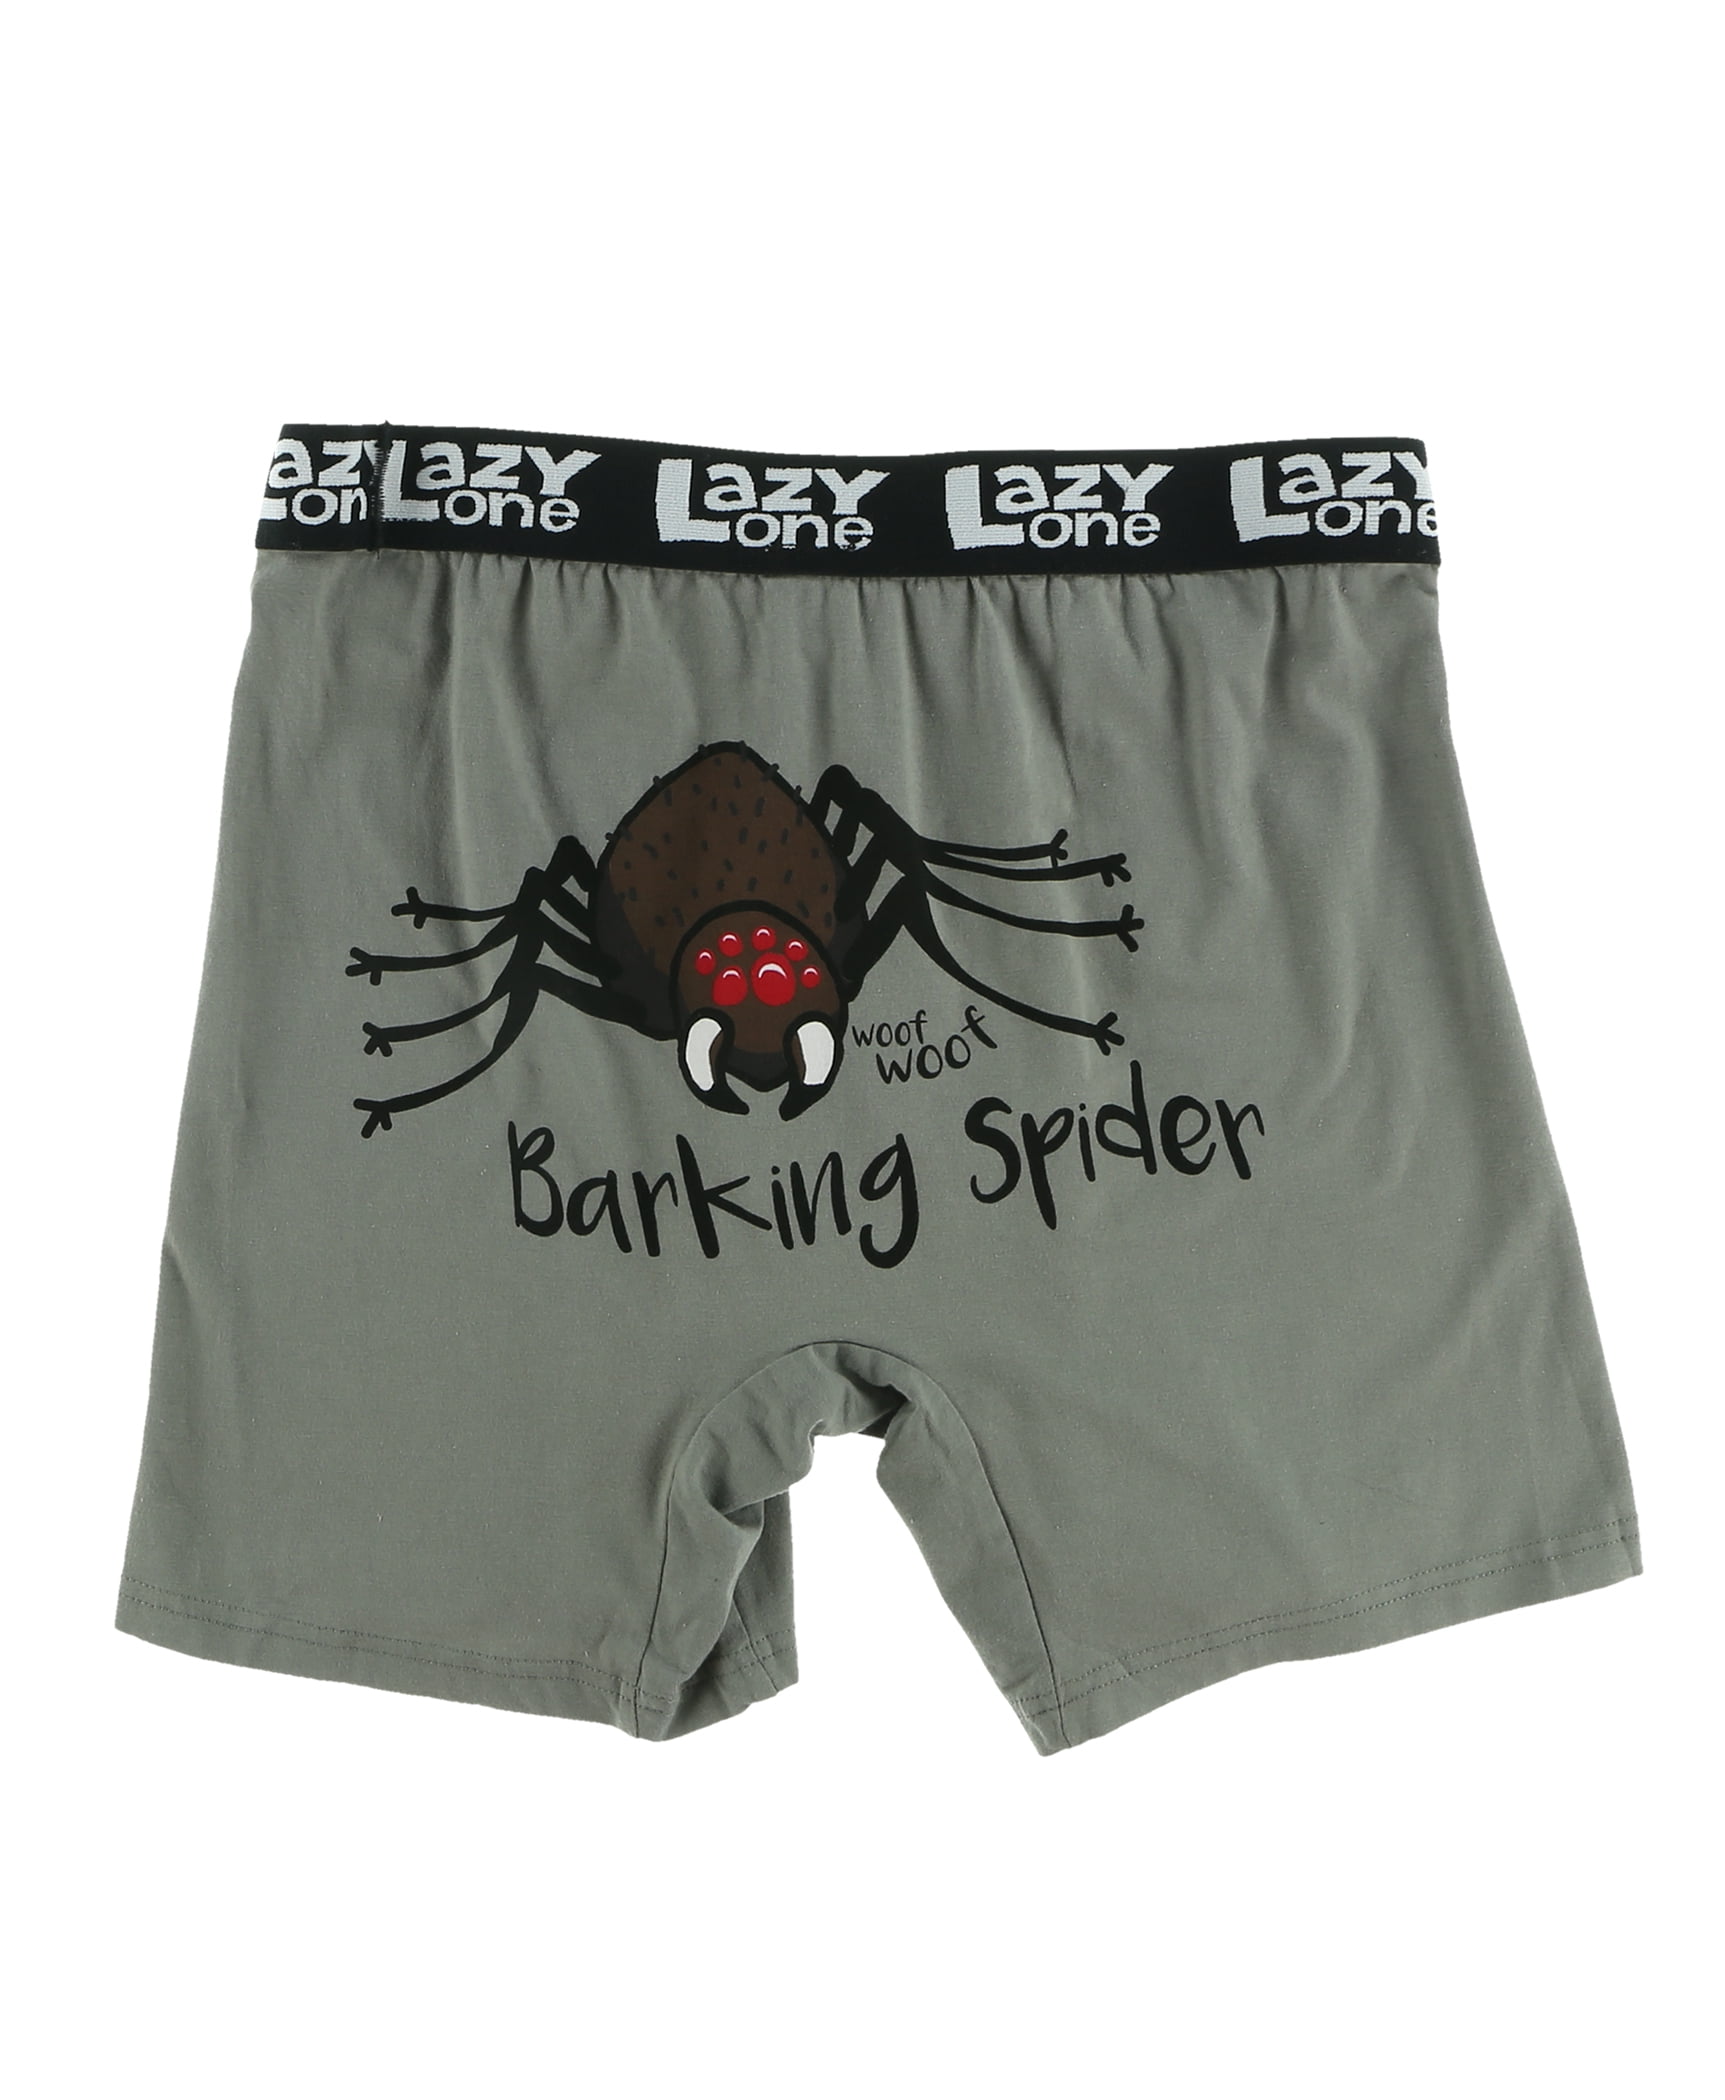 Lazy One Funny Animal Boxer Briefs for Men, Underwear for Men, Bugs,  Insects (Barking Spider, X-Large)